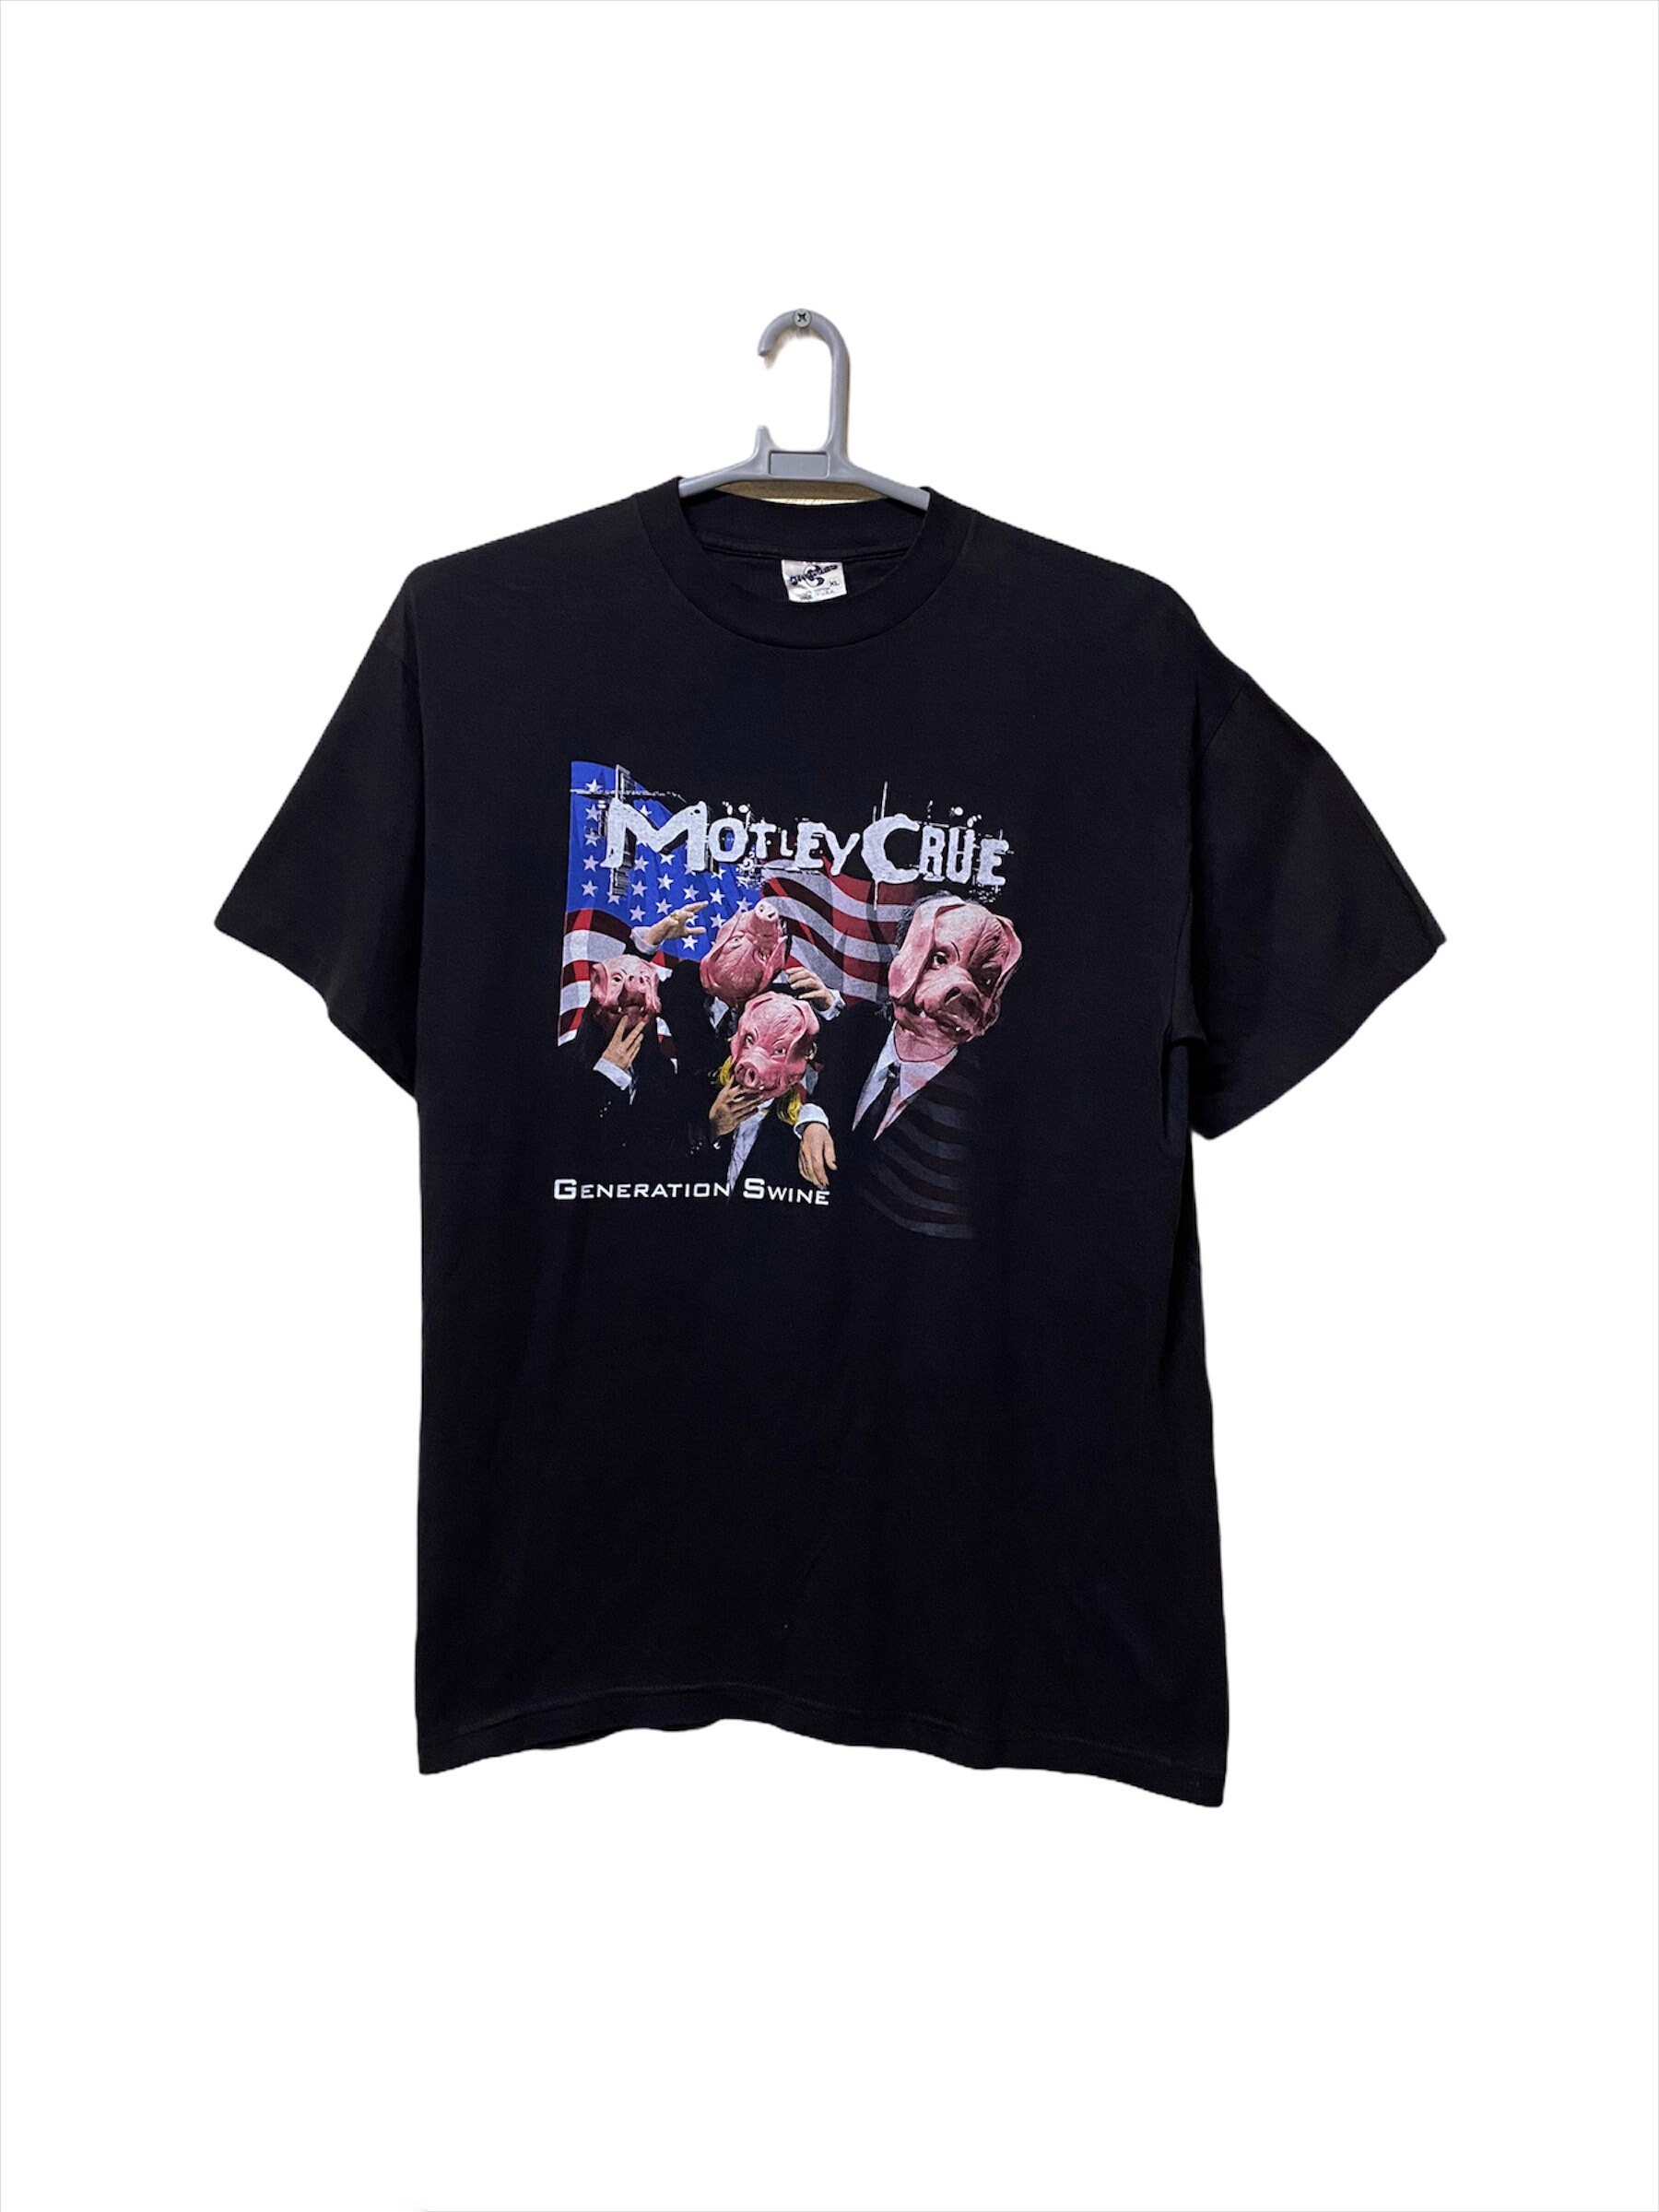 Vintage 80s 90s Motley Crue T-Shirt Unisex Rock Band Double Sided Tee